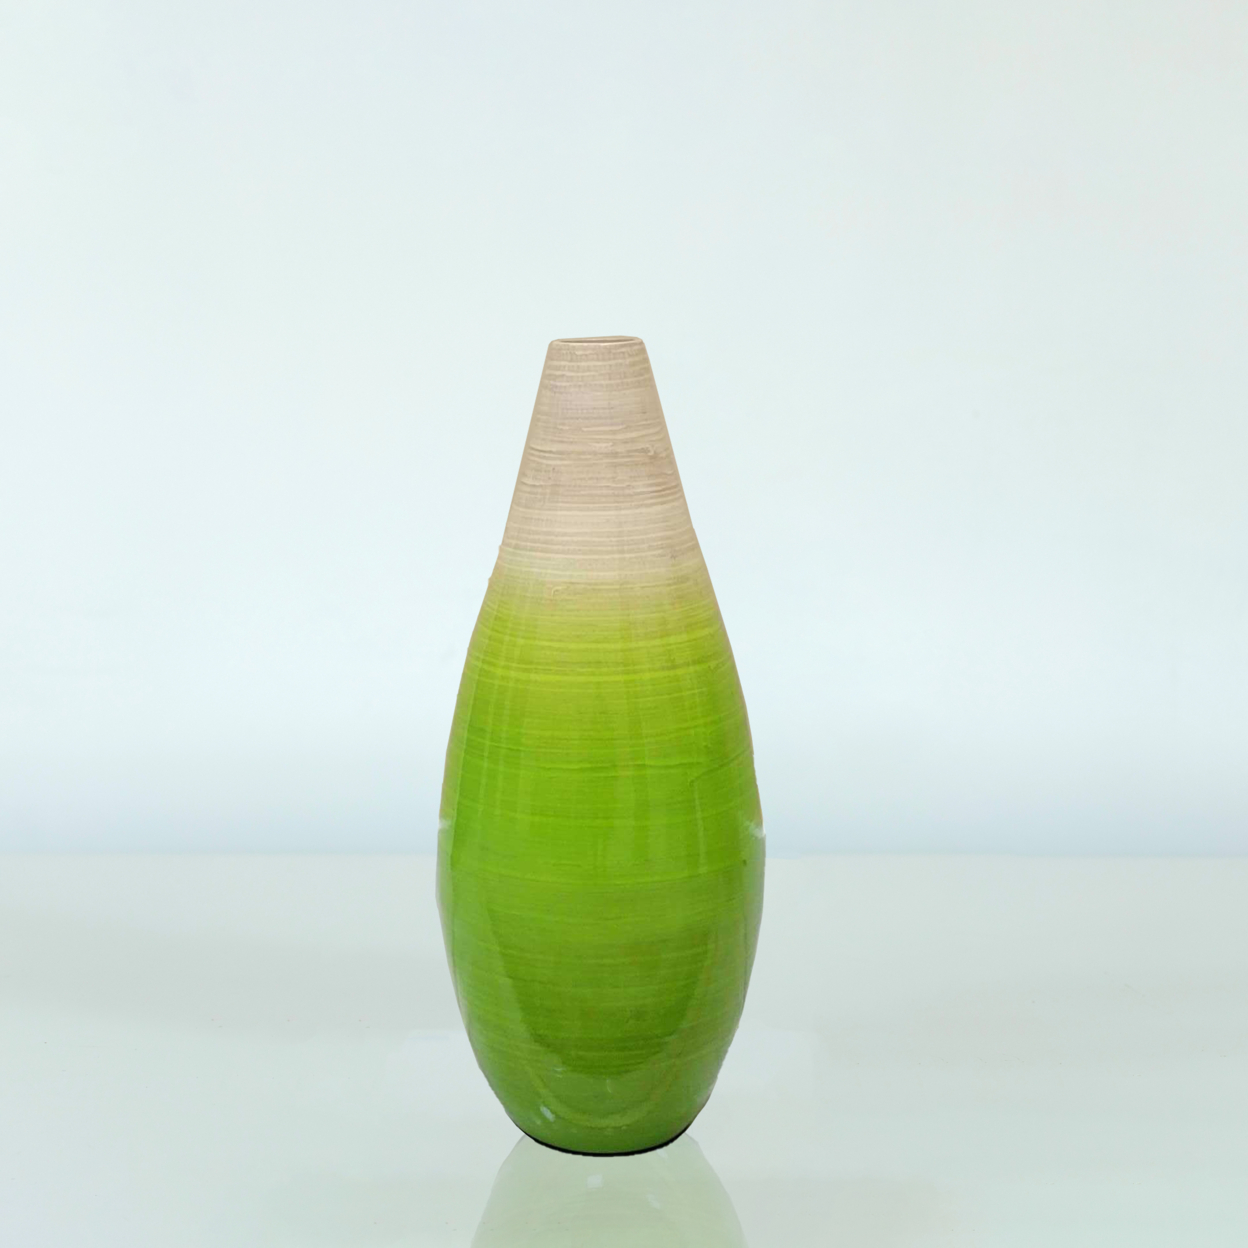 Contemporary Bamboo Floor Flower Vase Tear Drop Design For Dining, Living Room, Entryway Decoration, Green - Large